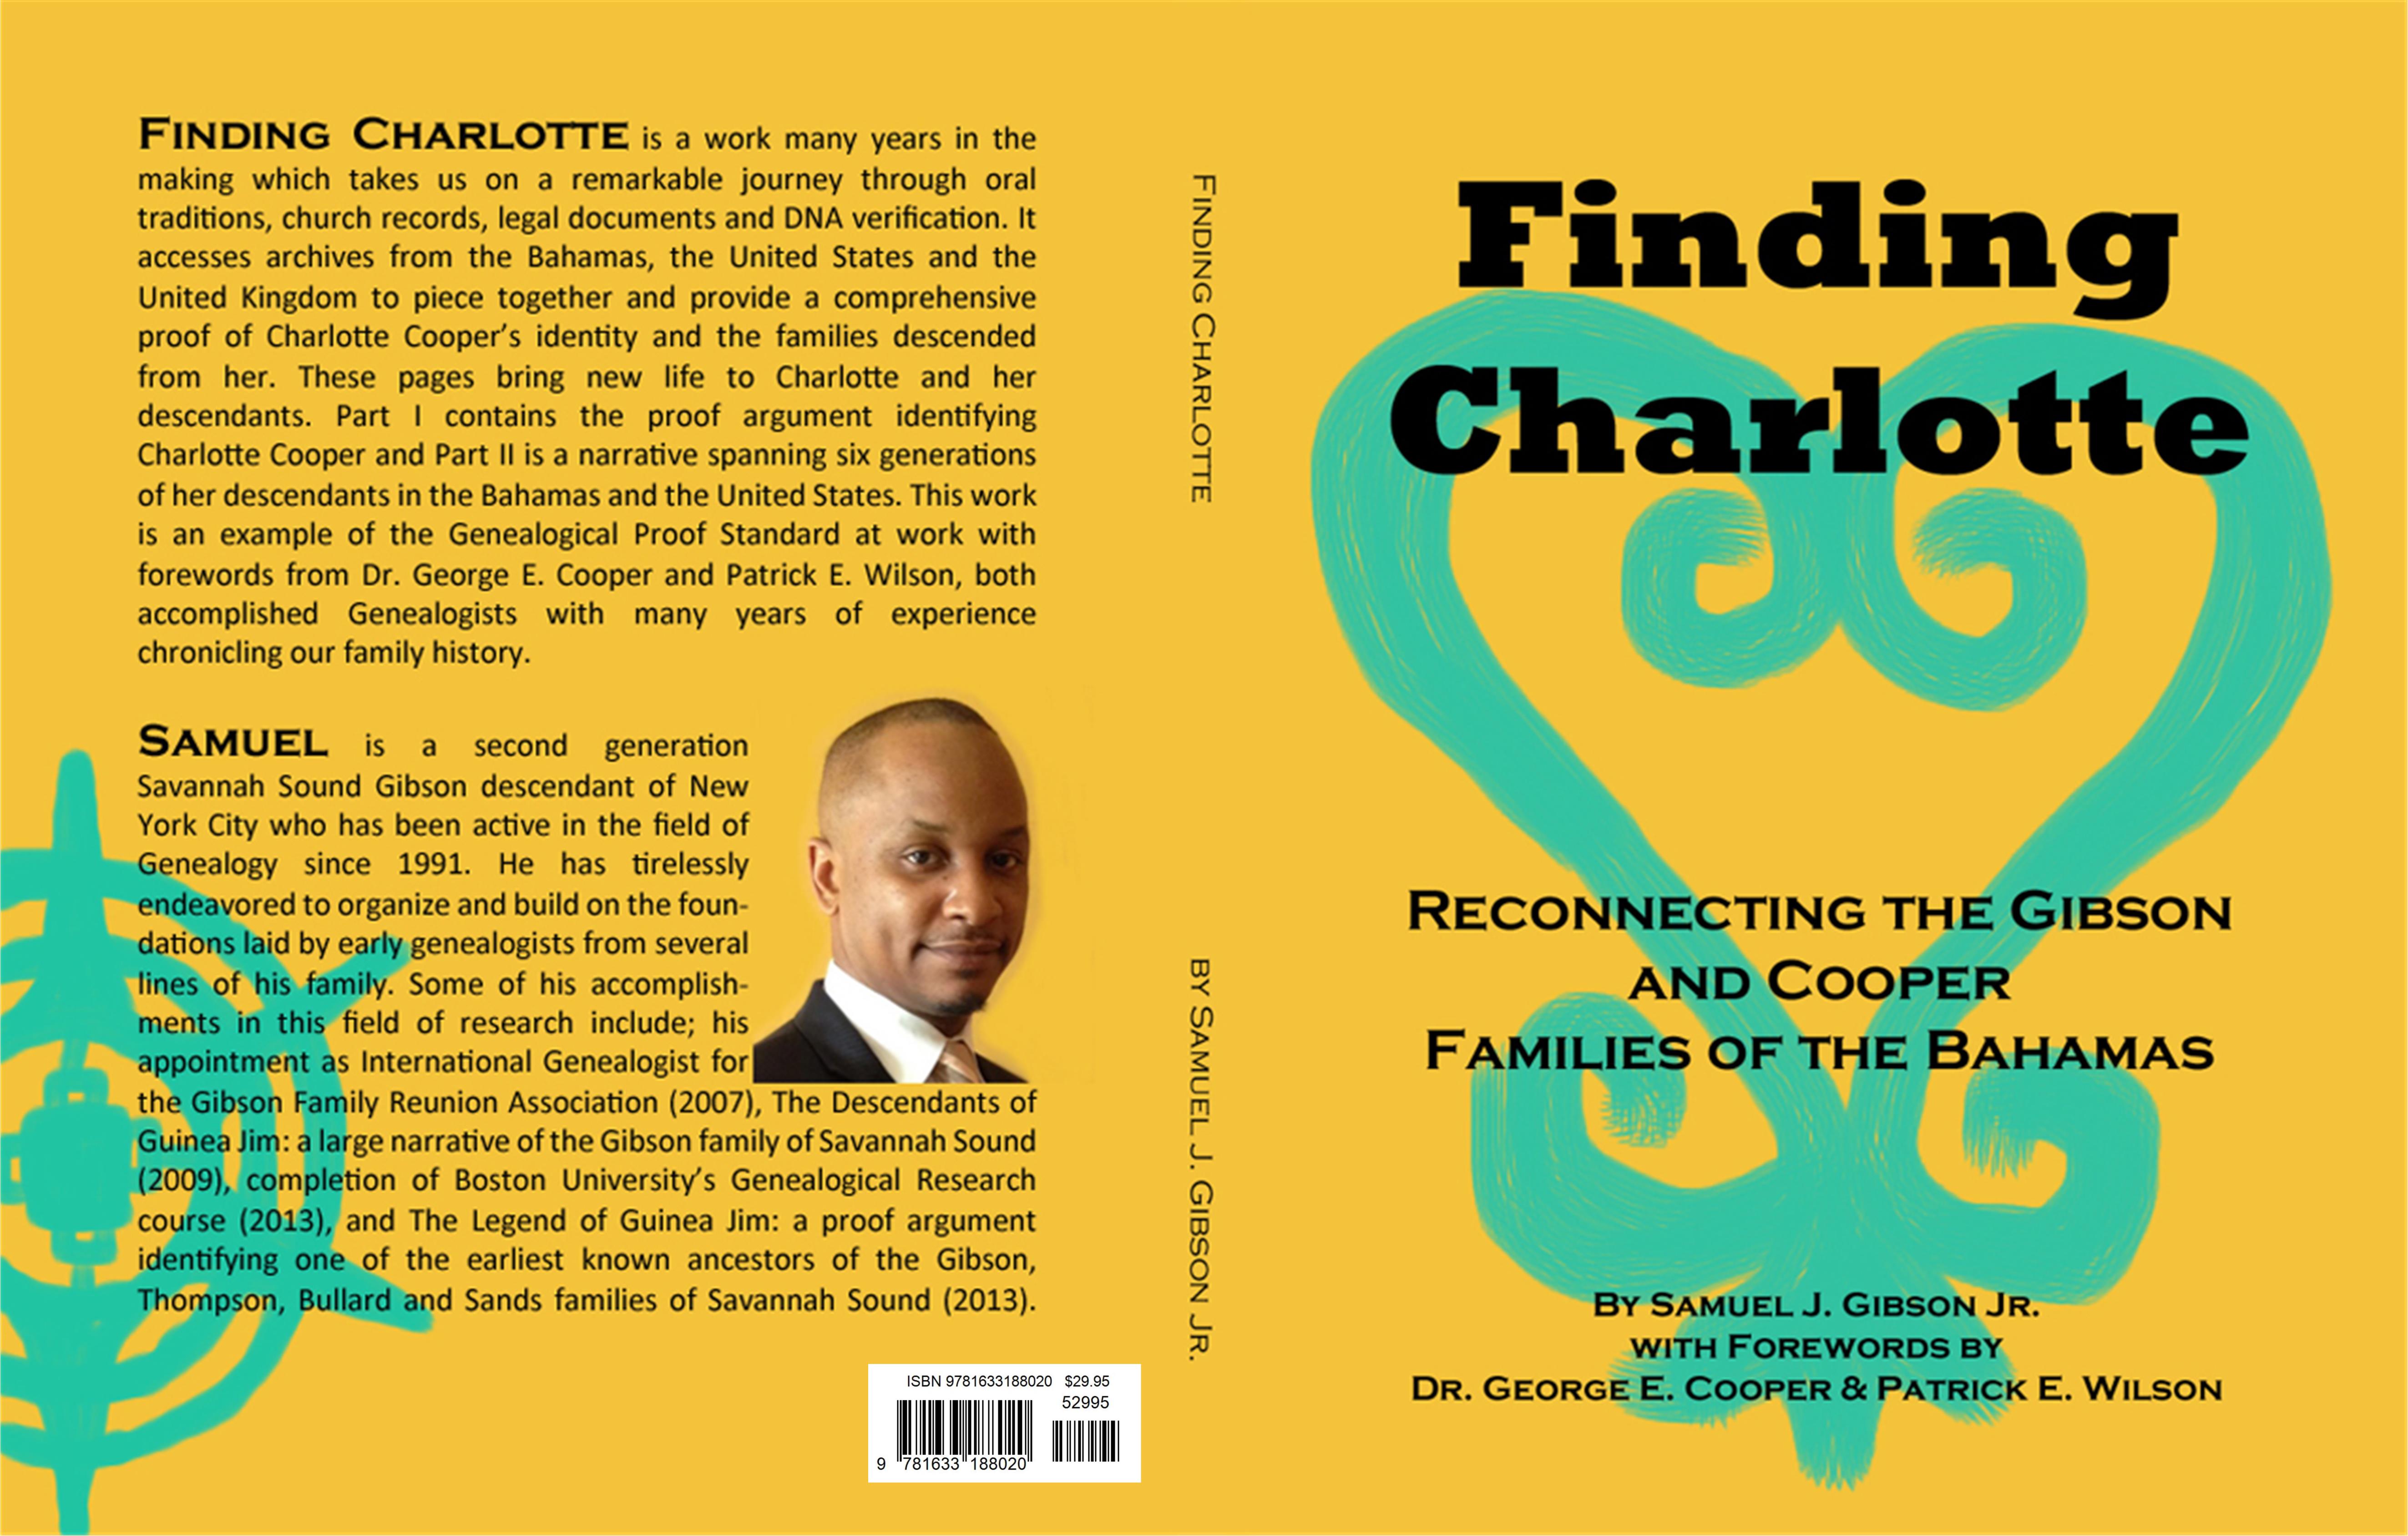 Finding Charlotte - Reconnecting the Gibson and Cooper Families of the Bahamas cover image